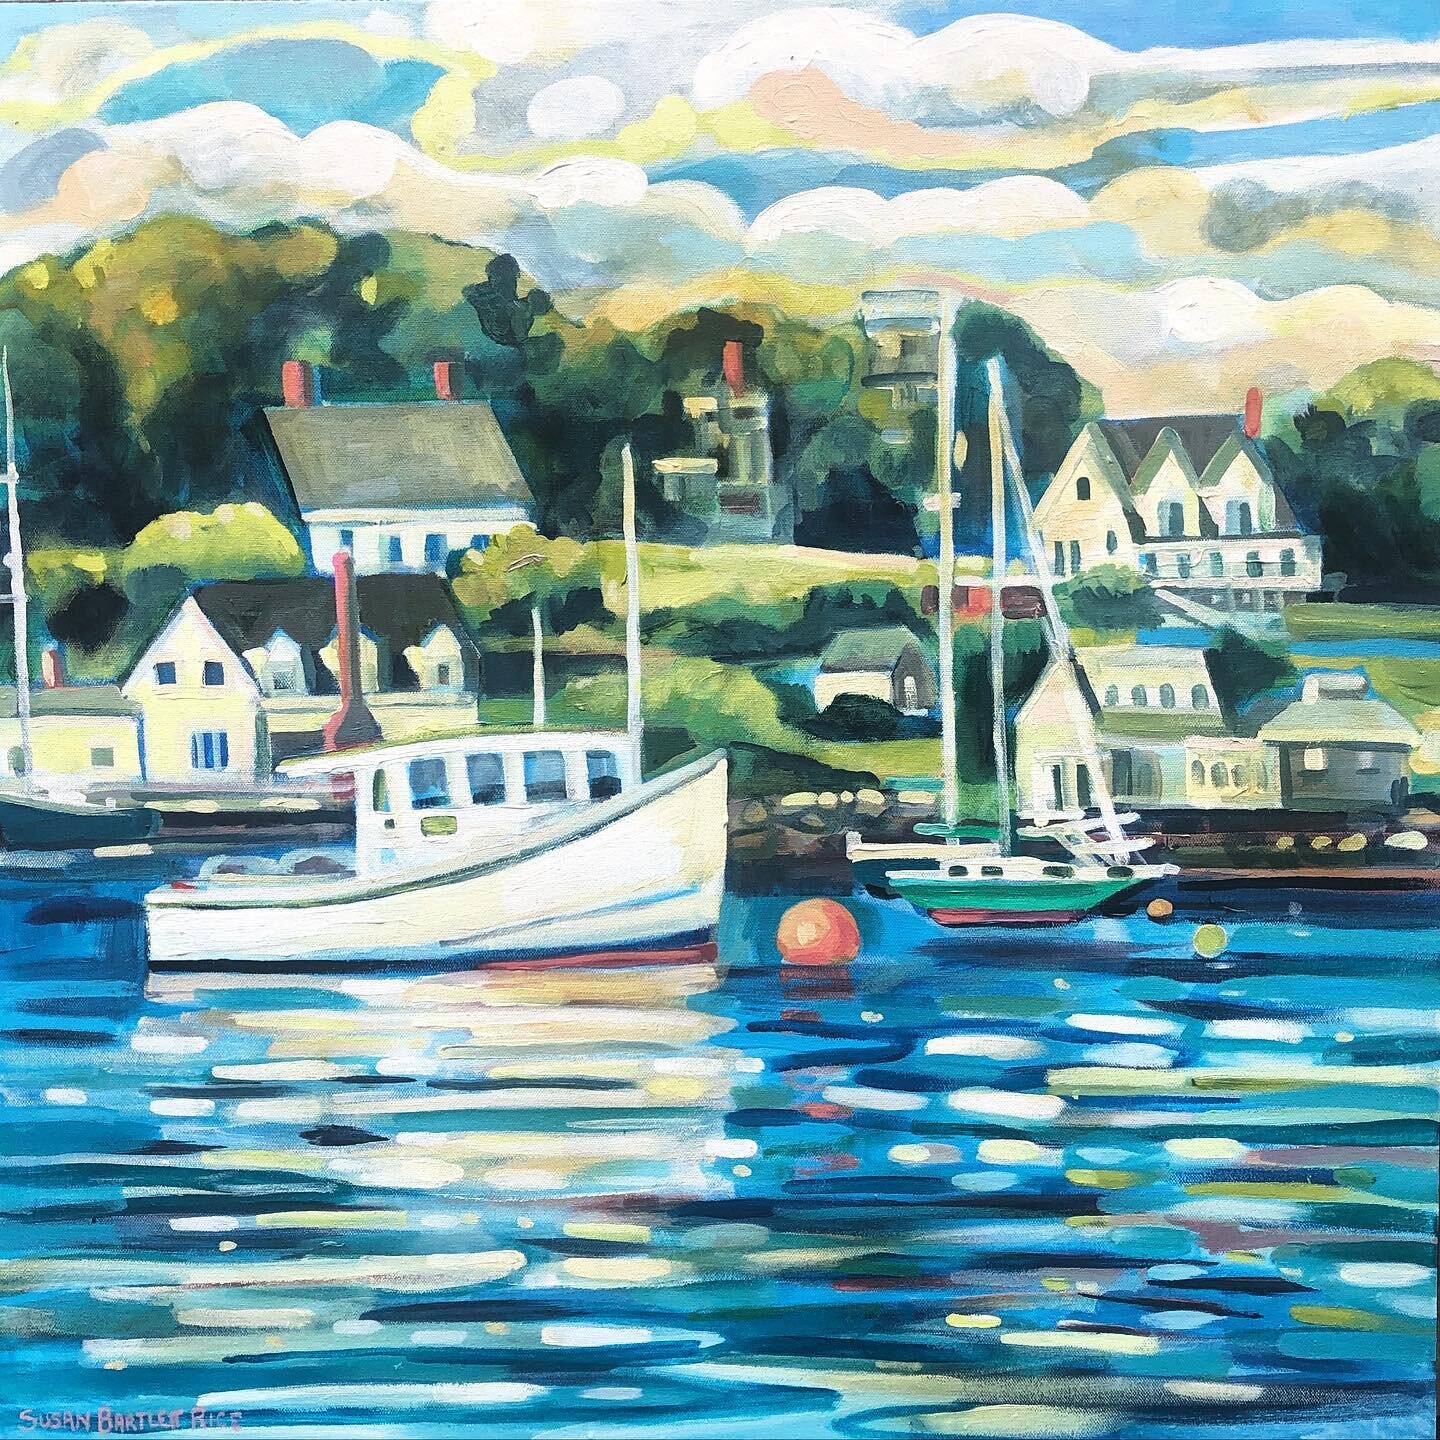 Holding onto these days just a little longer&hellip;..

Susan Bartlett Rice
&ldquo;Hazy Cove&rdquo;
30x30
Acrylic on canvas
2023
*Sold&hellip; thank you! 
.
.

#Artist #Maine #Maineartist #mainelife #maineart #mainepaintings #NewEngland #Maineart #ma